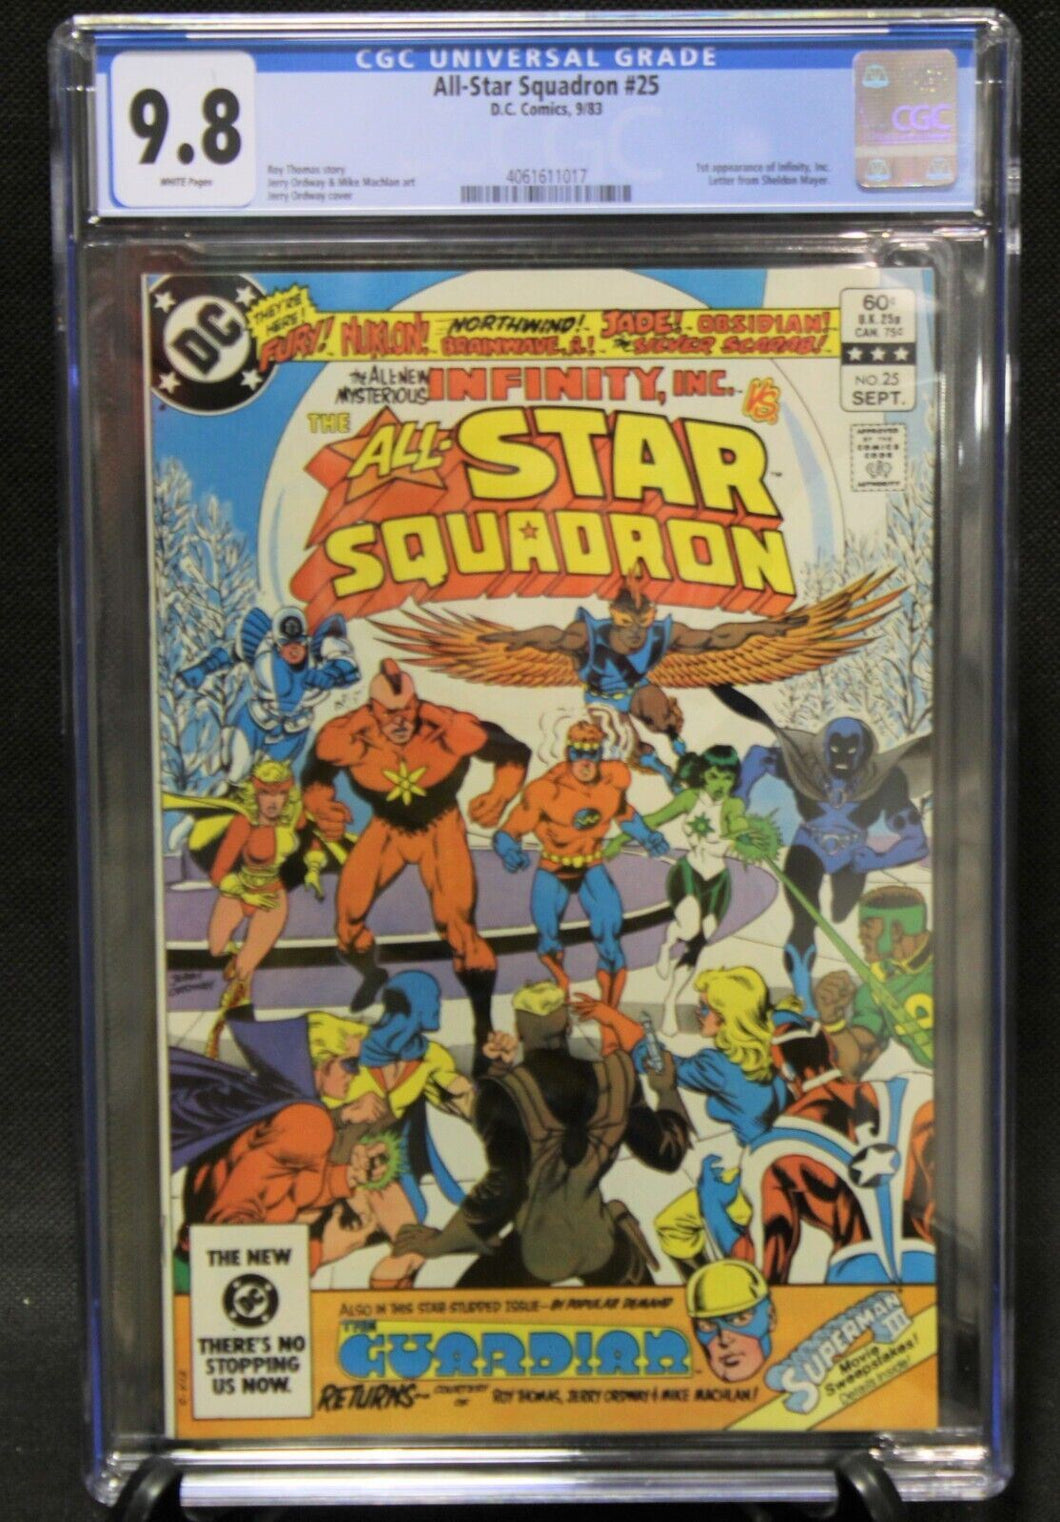 All-Star Squadron #25 CGC 9.8 White Pages, 1st Appearance of Infinity, Inc.